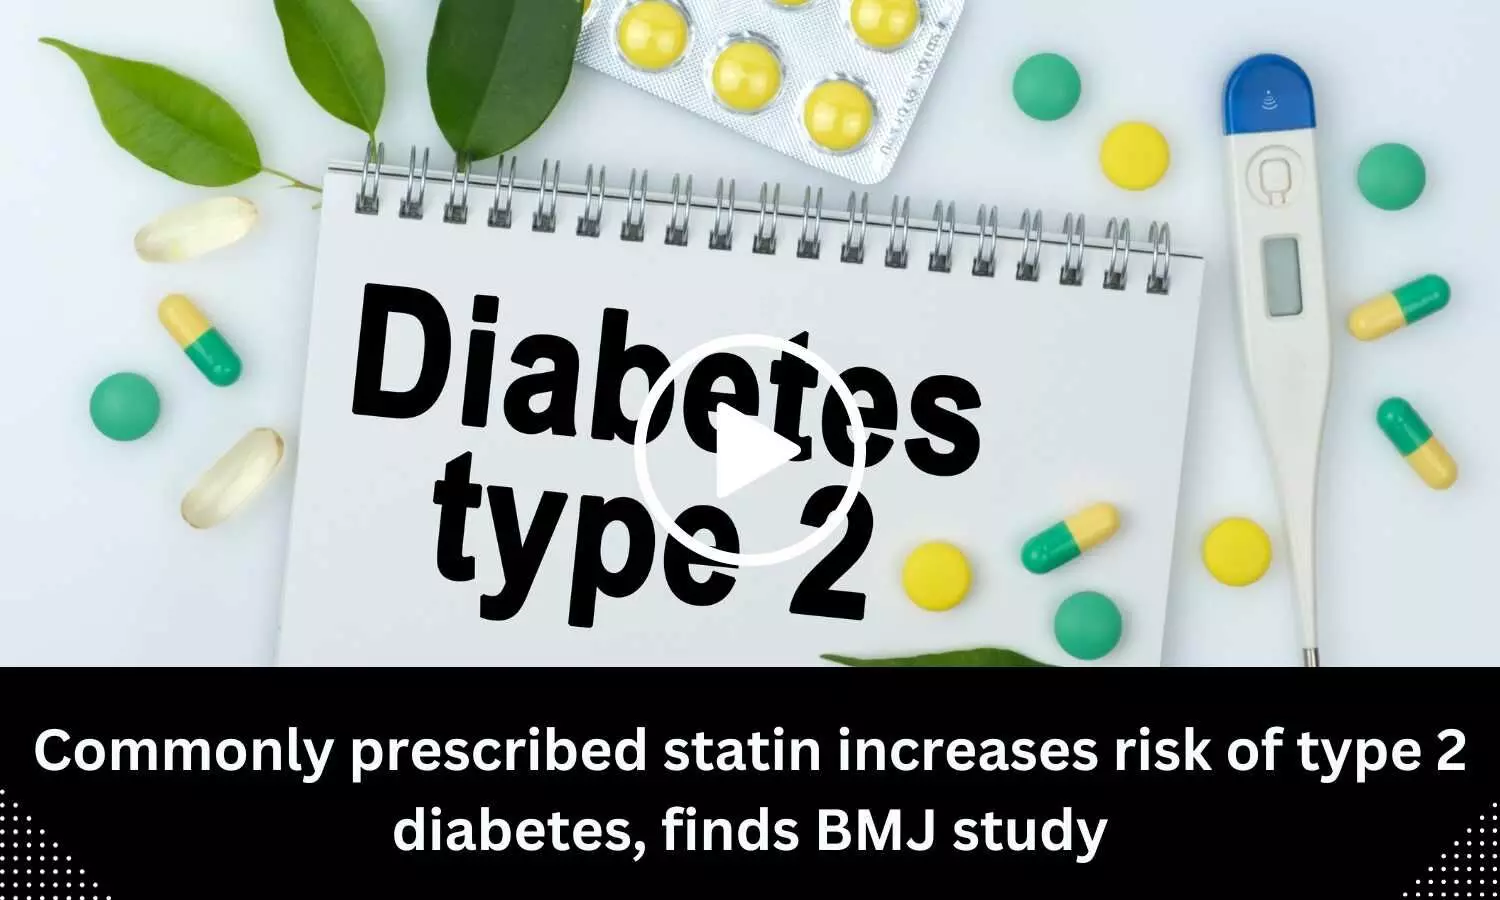 Commonly prescribed statin increases risk of type 2 diabetes, finds BMJ study